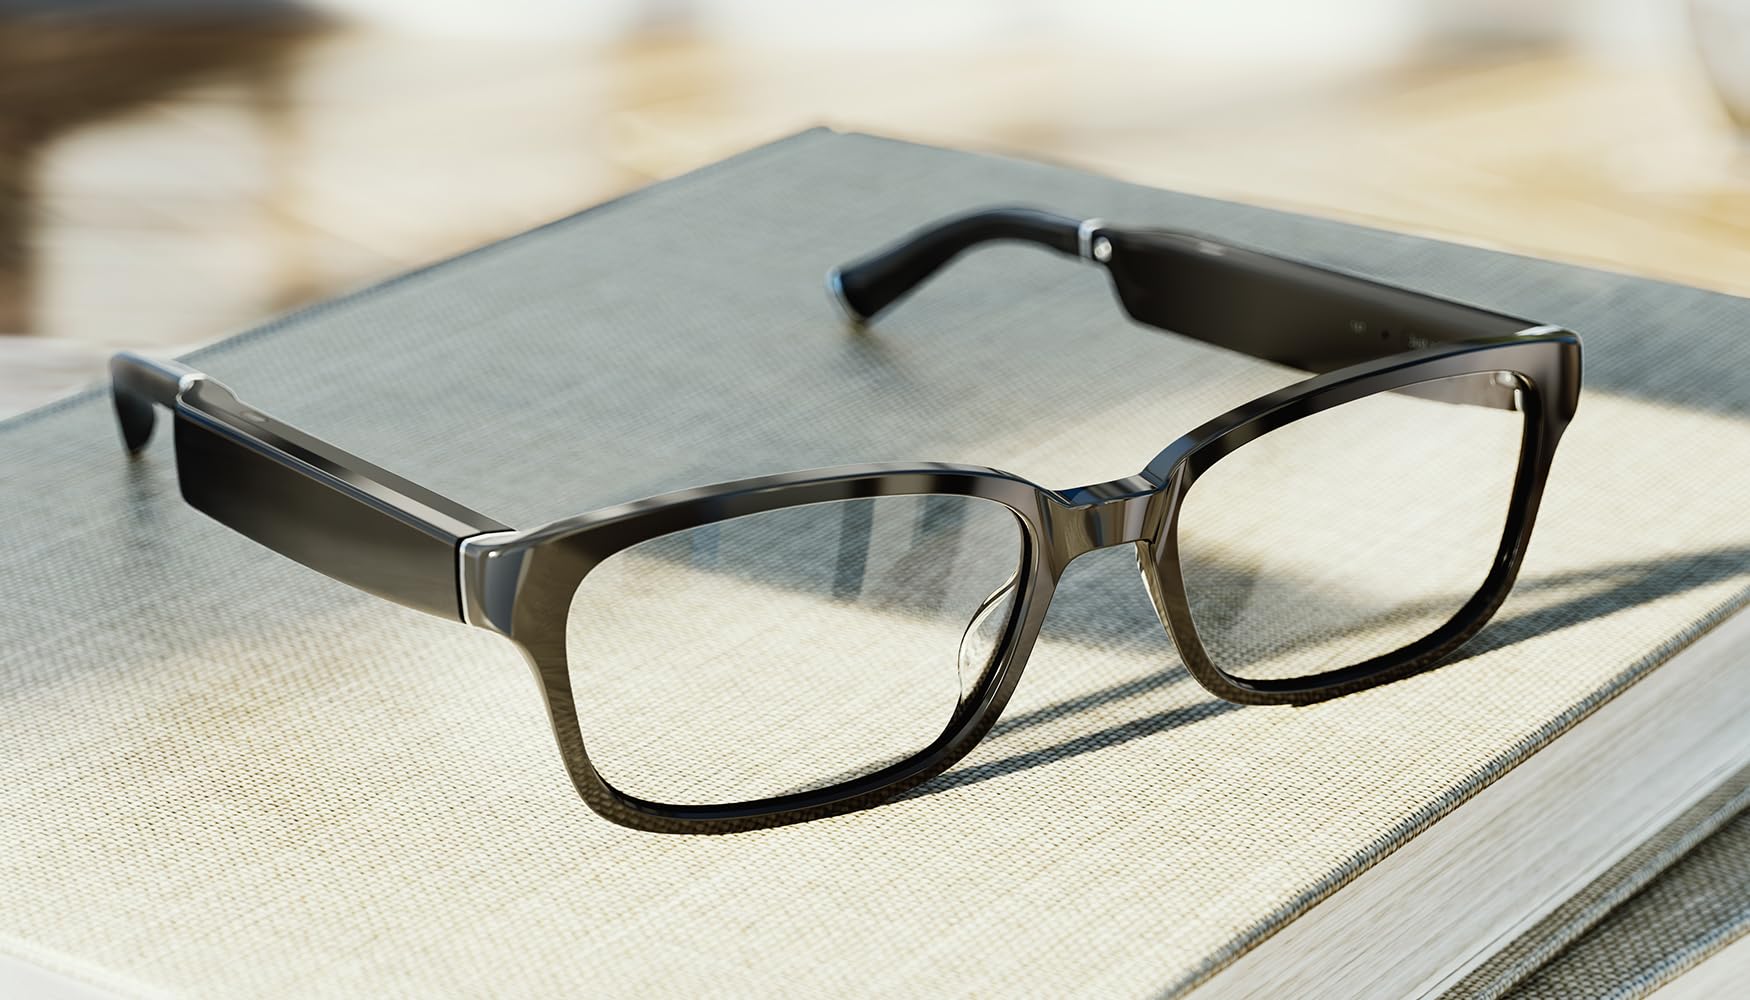 Echo Frames (3rd Gen) | Smart audio glasses with Alexa | Rectangle frames in Classic Black with prescription ready lenses